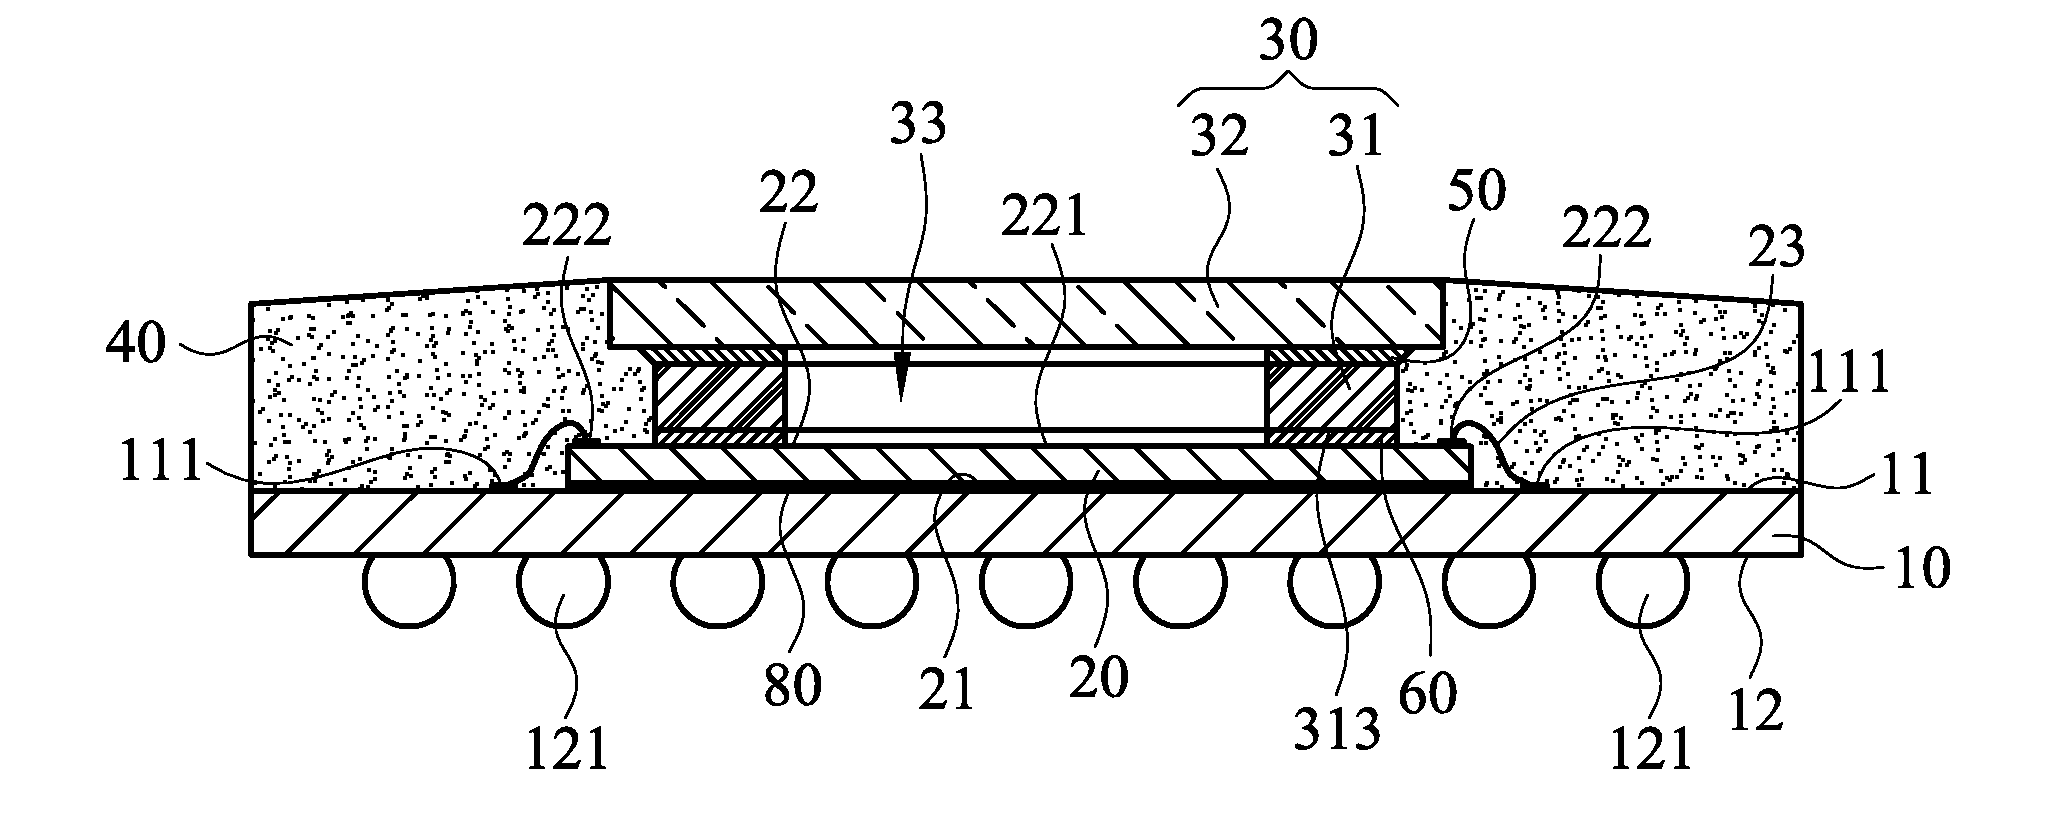 Image sensor package structure with large air cavity